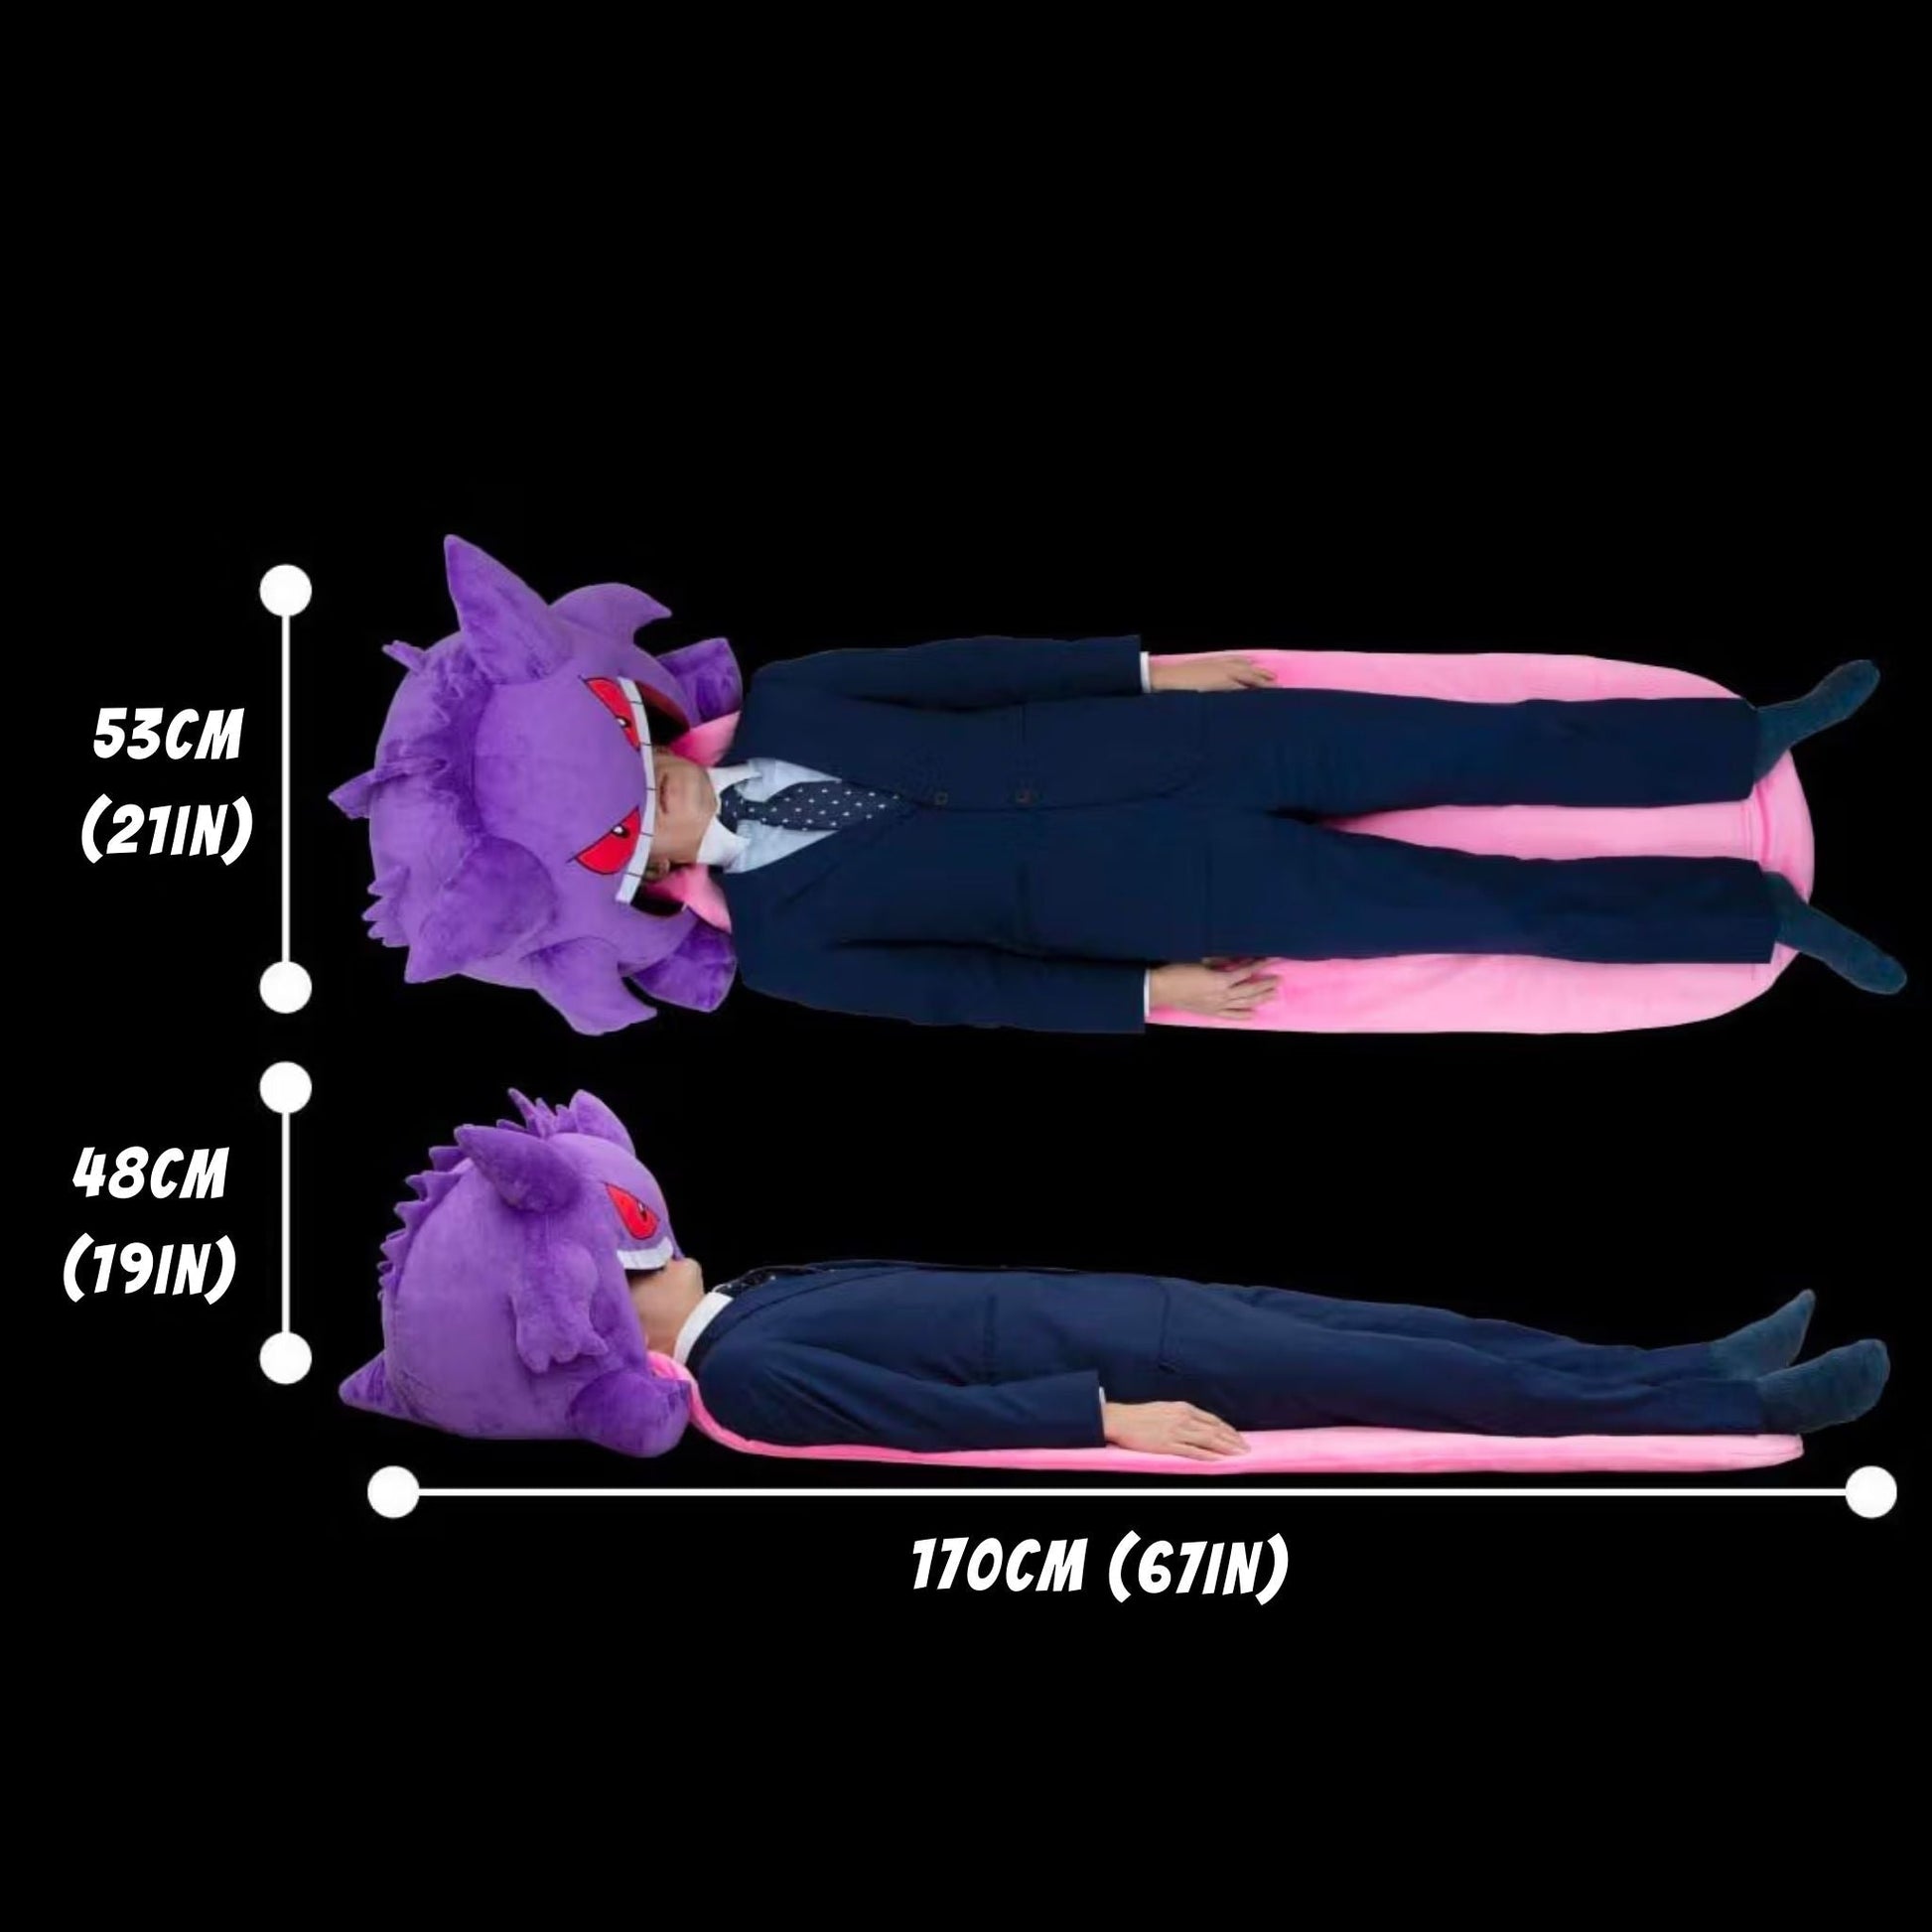 Dimensions - Gengar Tongue Pillow Blanket Sleeping Pod For Afternoon Naps. Portable design for travel, work and on the go napping. Perfect gift for Pokémon fans.